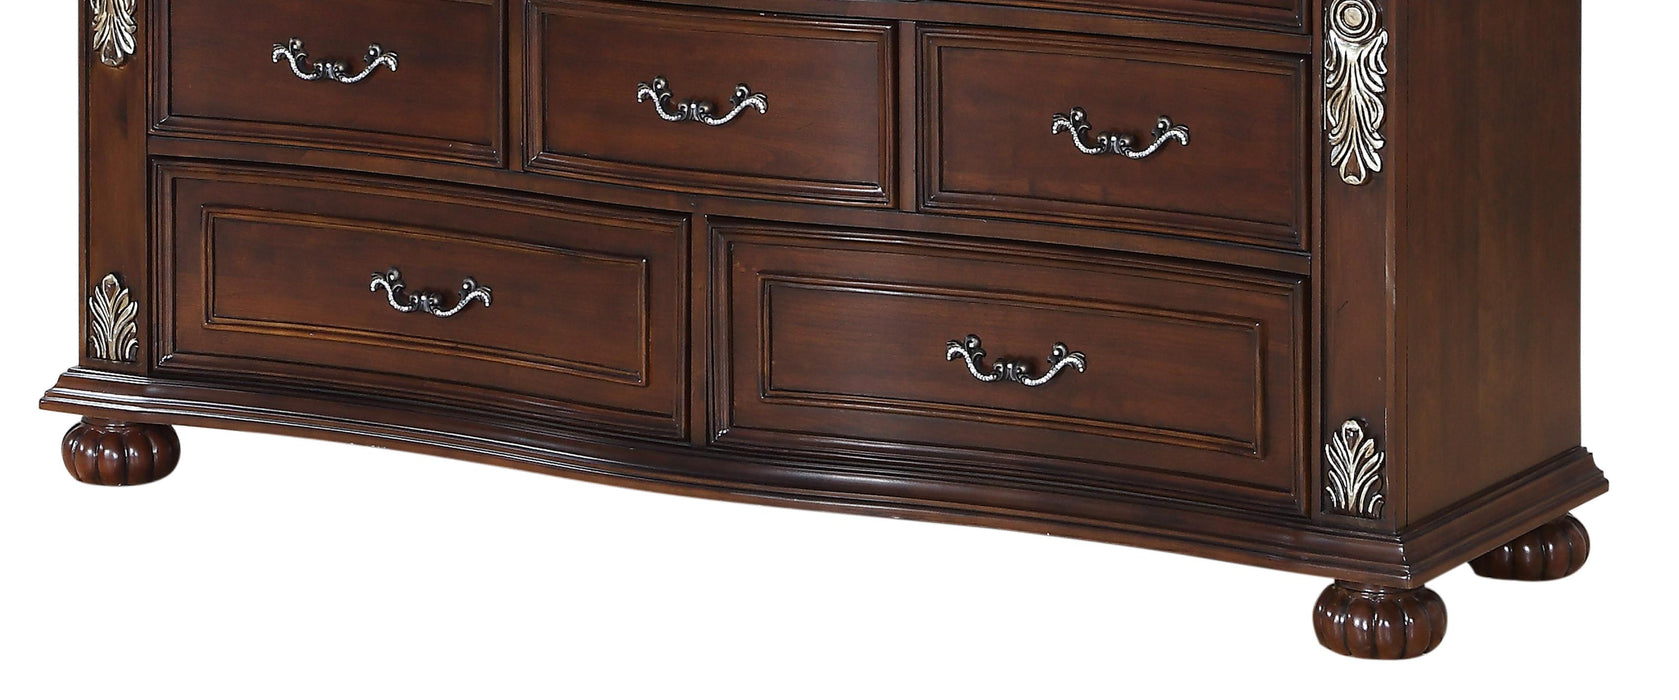 Rosanna Traditional Style Dresser in Cherry finish Wood